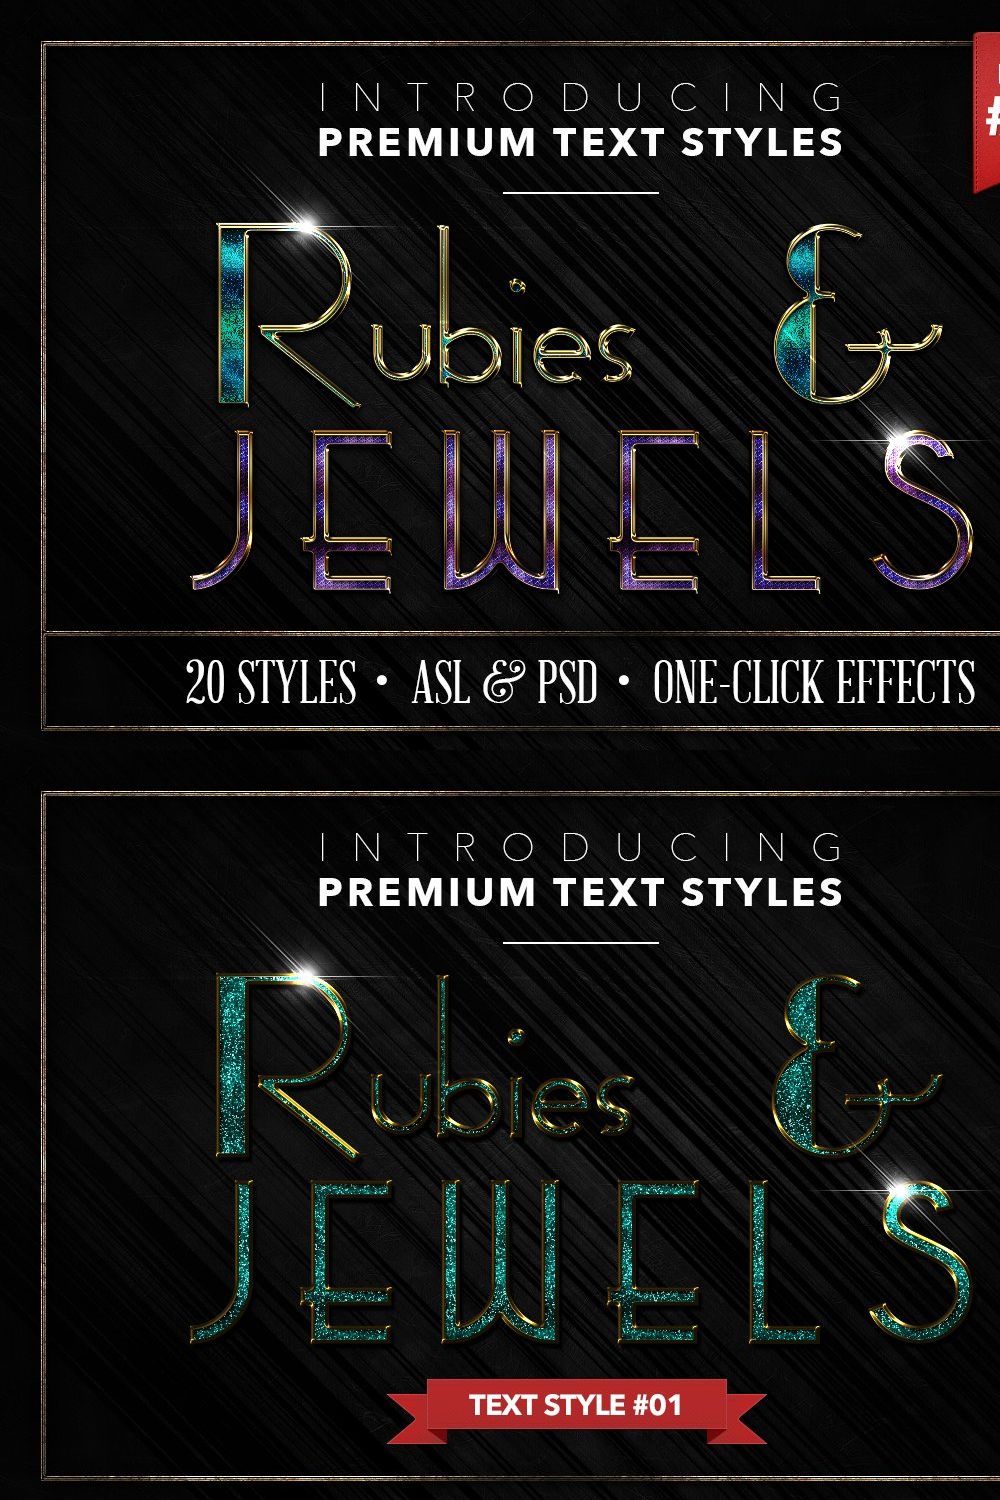 Rubies & Jewels #3 - 20 Text Styles pinterest preview image.